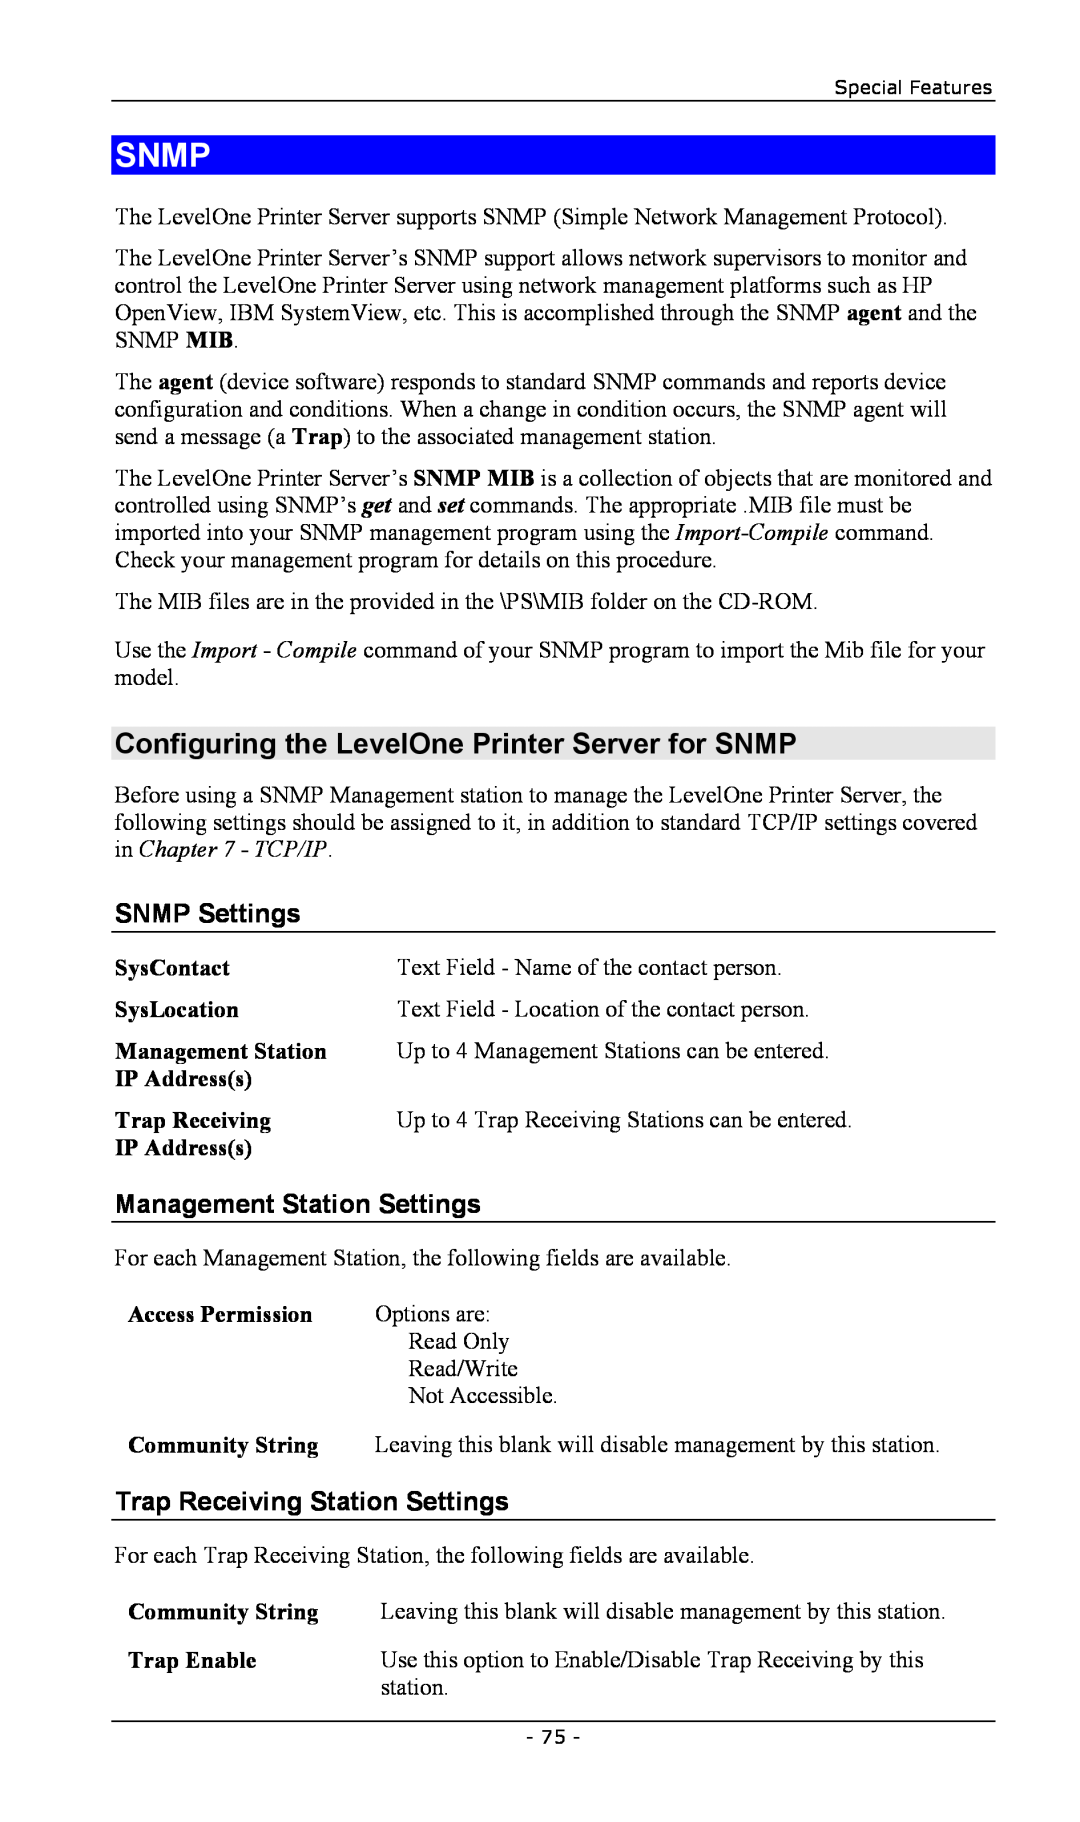 LevelOne FPS-2003TXU Snmp, Configuring the LevelOne Printer Server for SNMP, SNMP Settings, Management Station Settings 